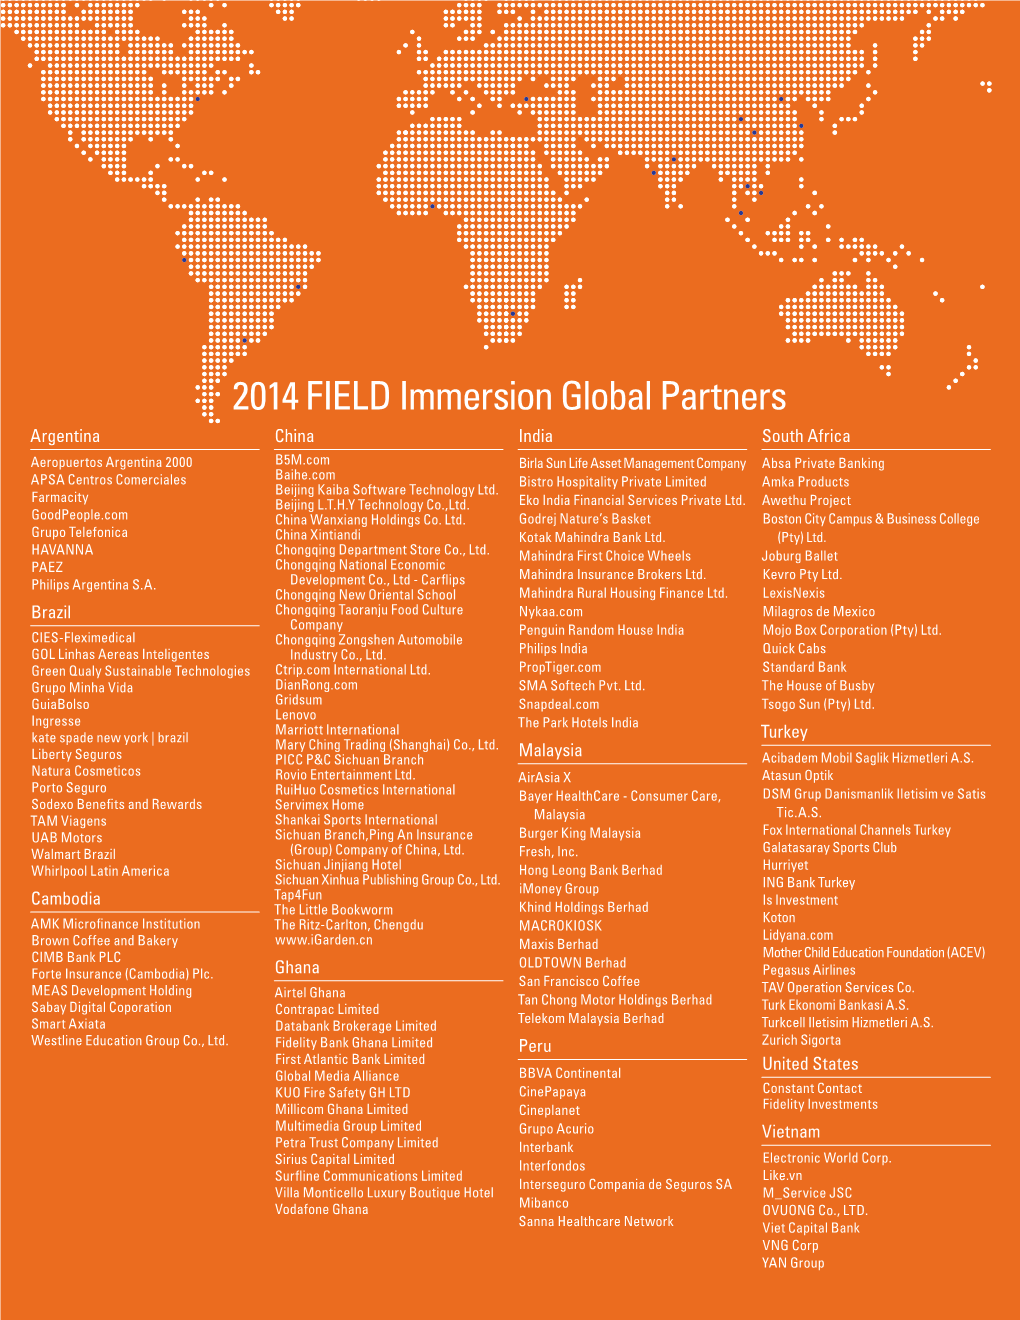 2014 FIELD Immersion Global Partners